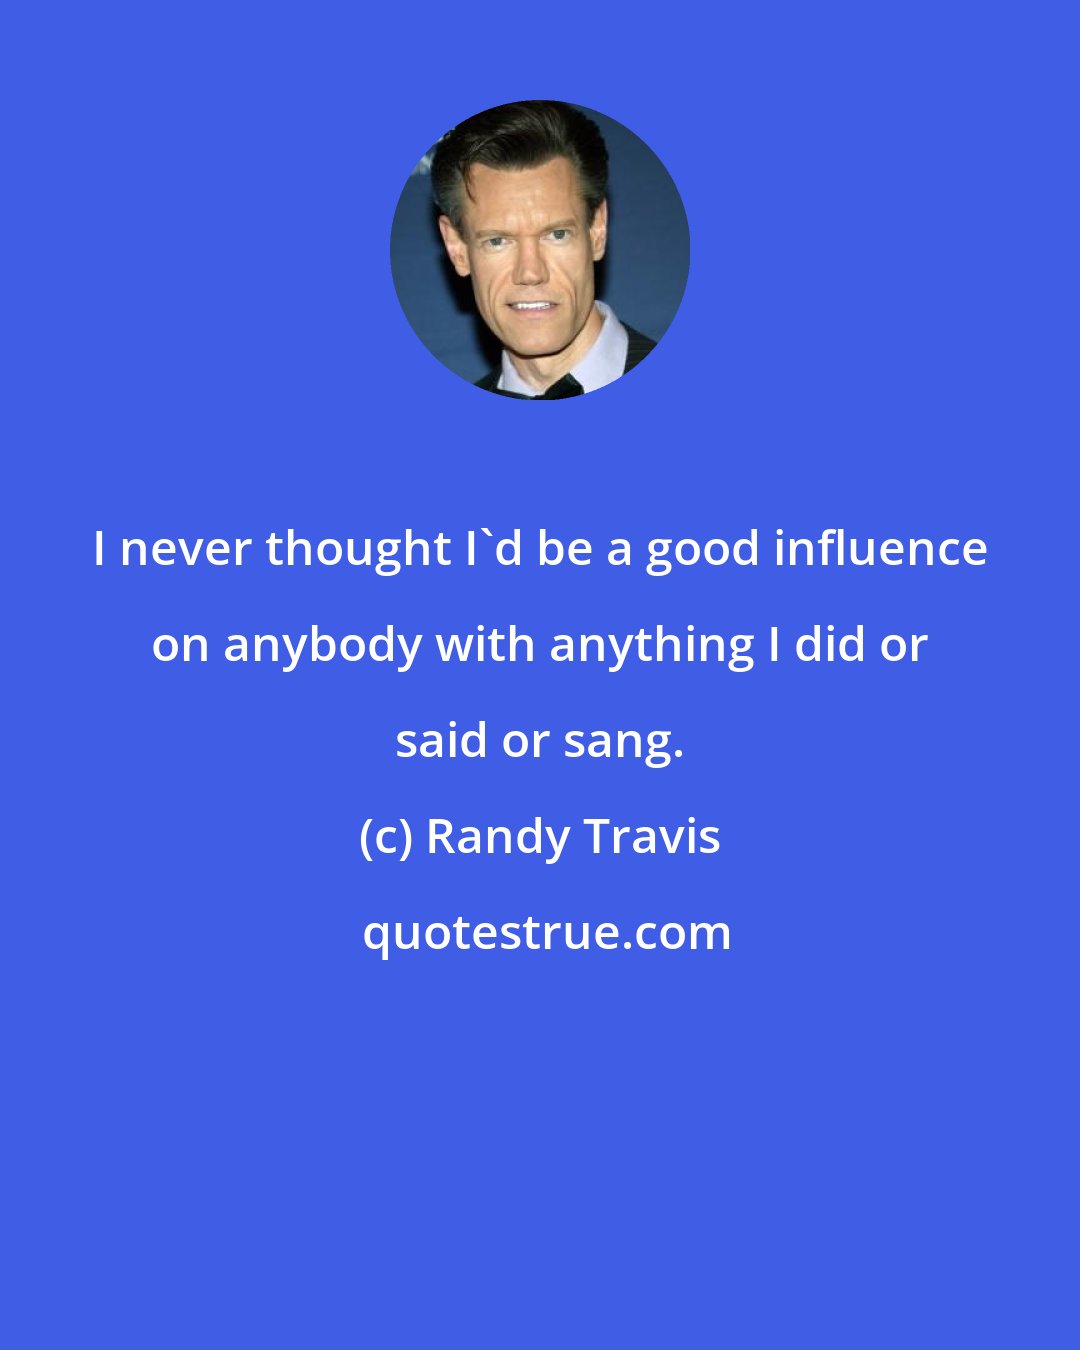 Randy Travis: I never thought I'd be a good influence on anybody with anything I did or said or sang.